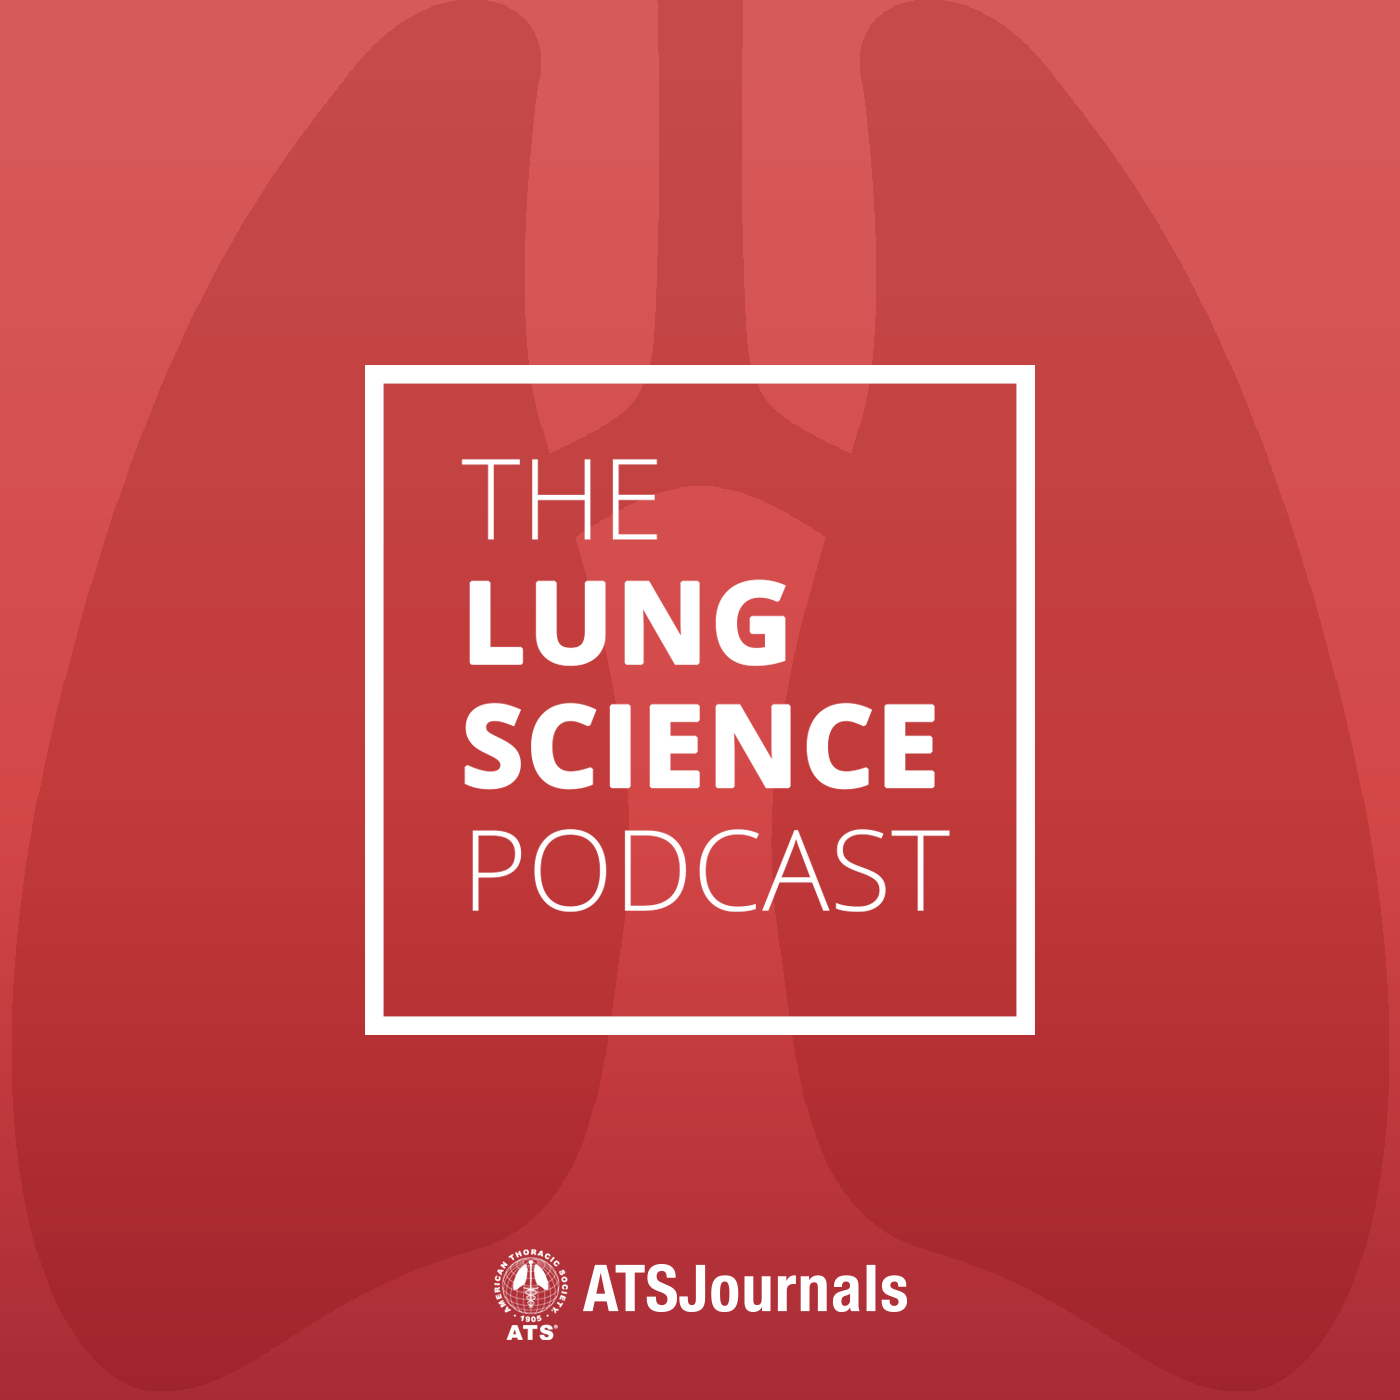 The Lung Science Podcast